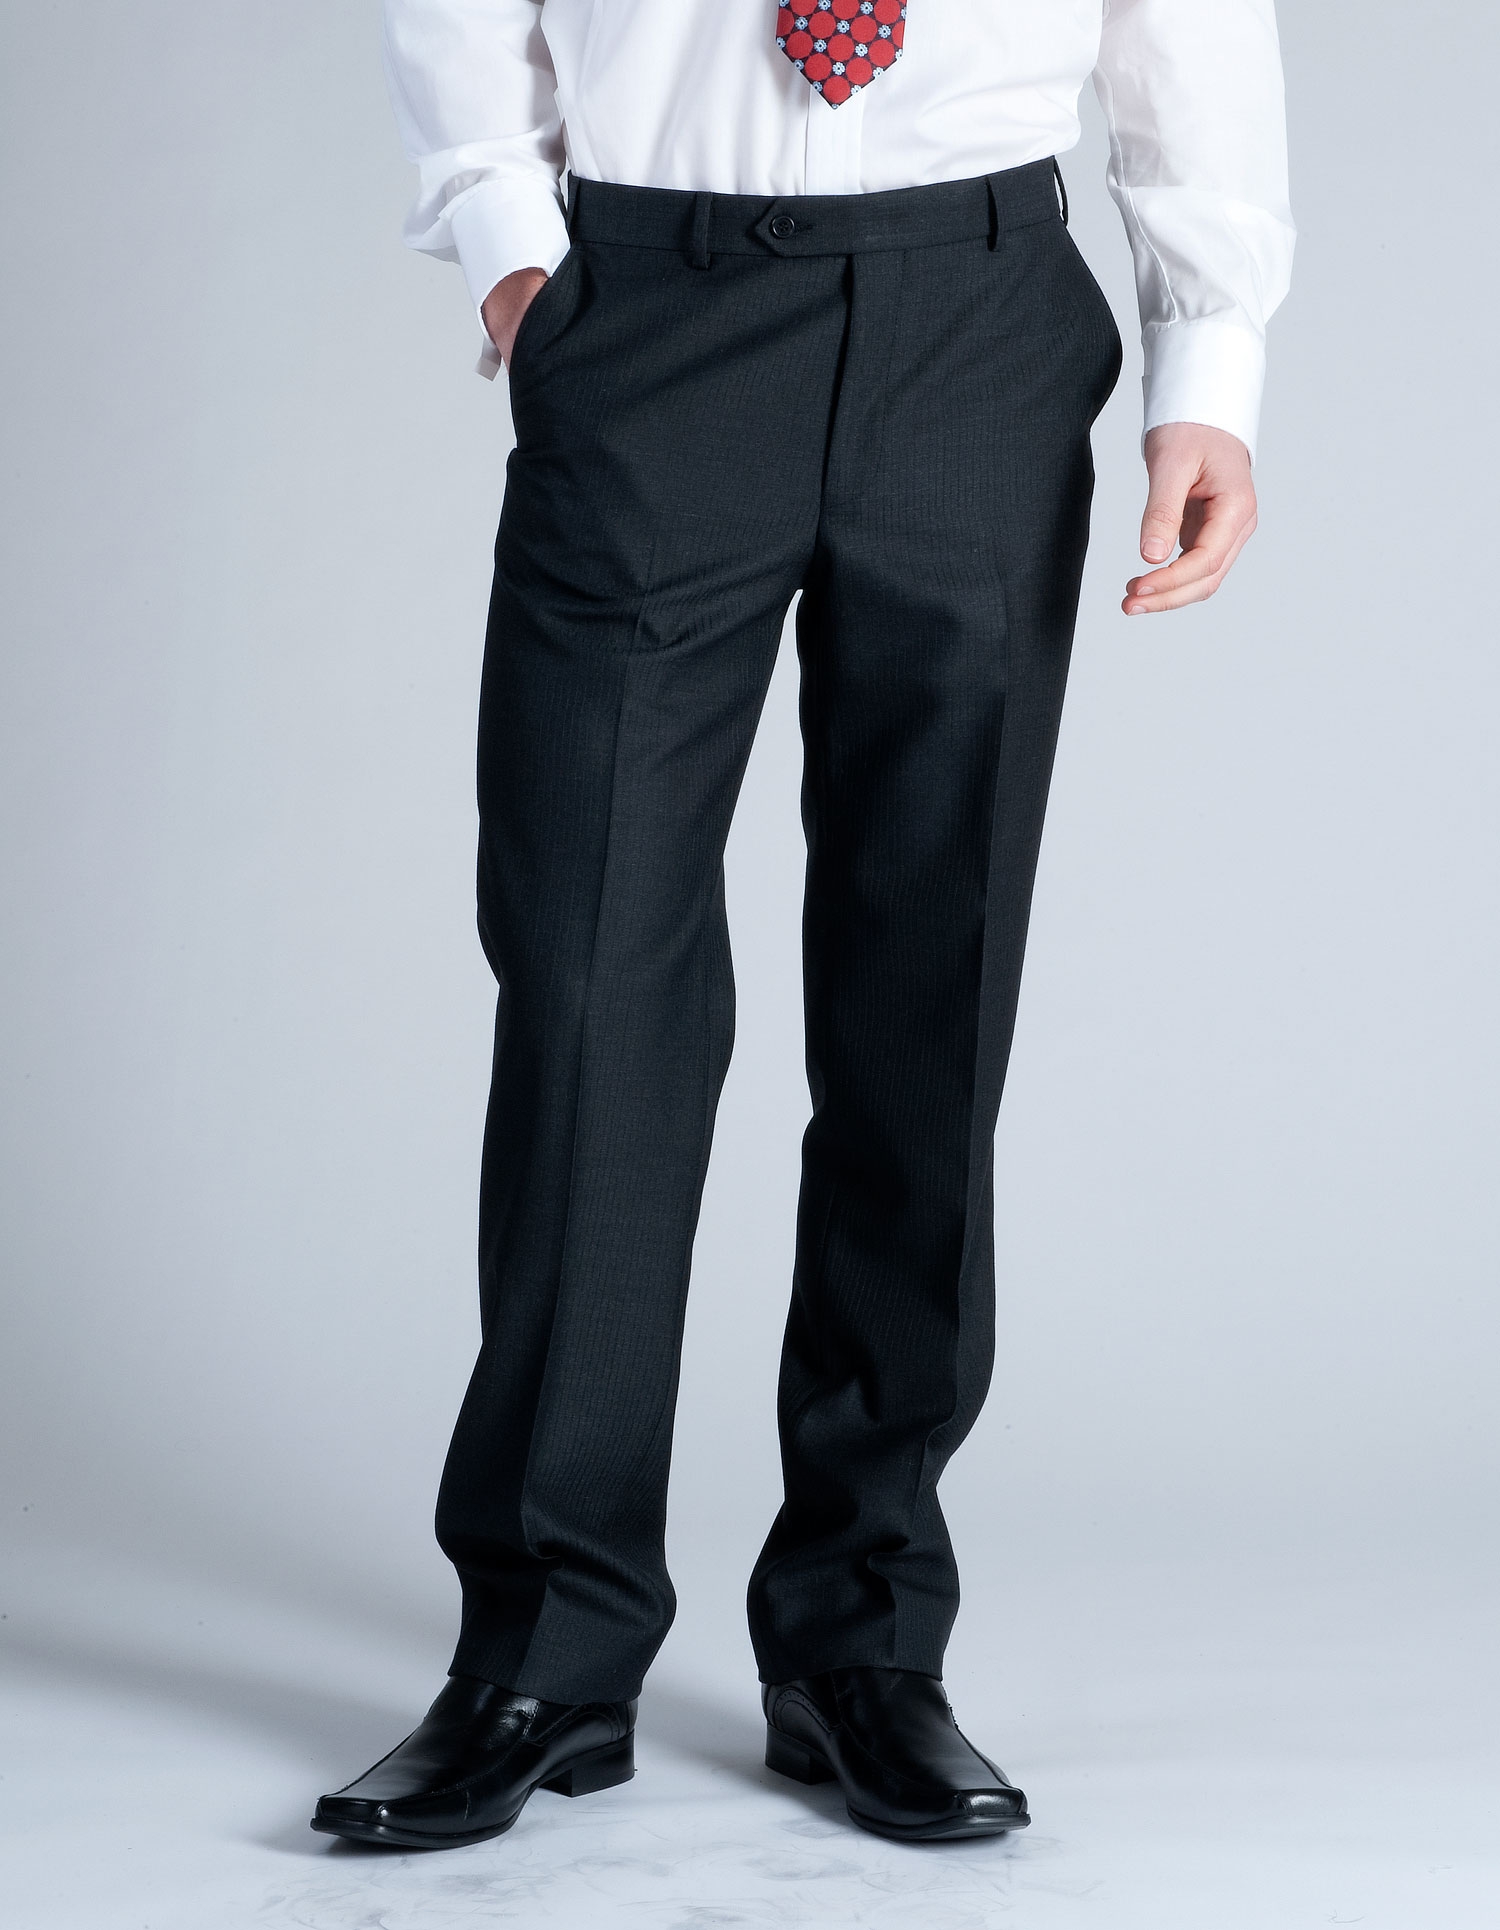 Grey Trousers Ref:17739t - Tom Murphy's Formal and Menswear